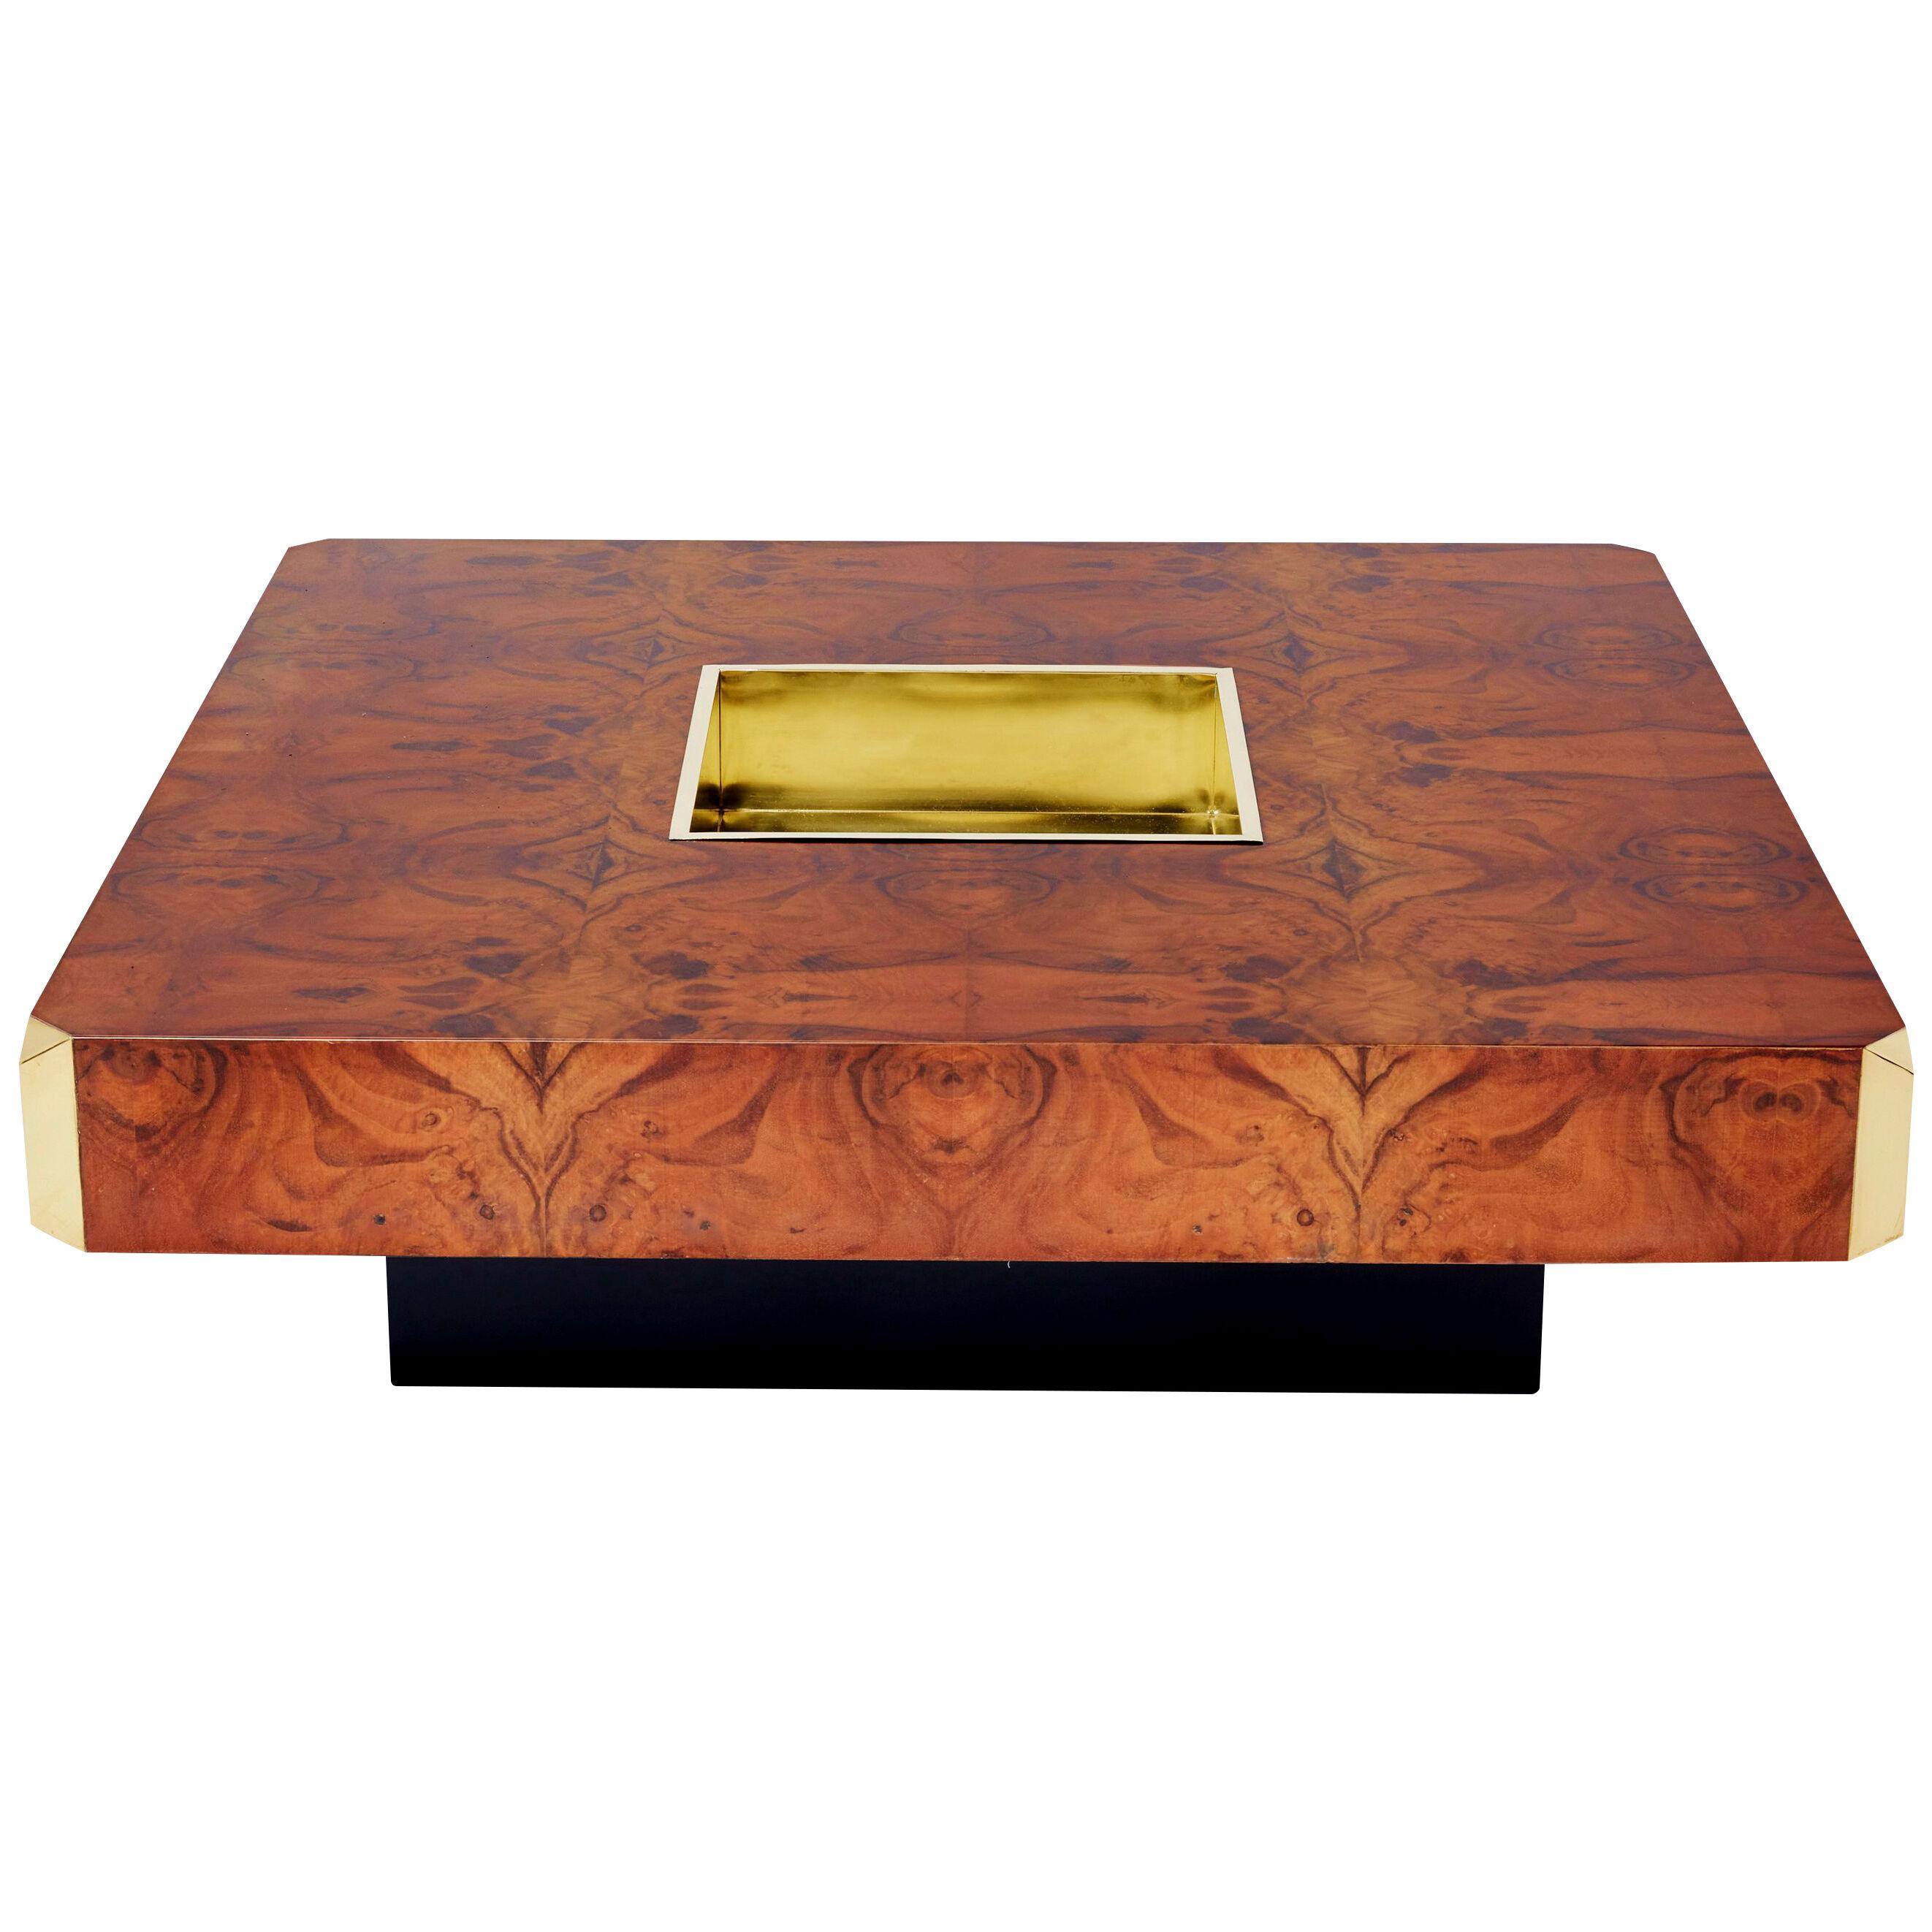 Willy Rizzo burl wood and brass square bar coffee table Alveo 1970s